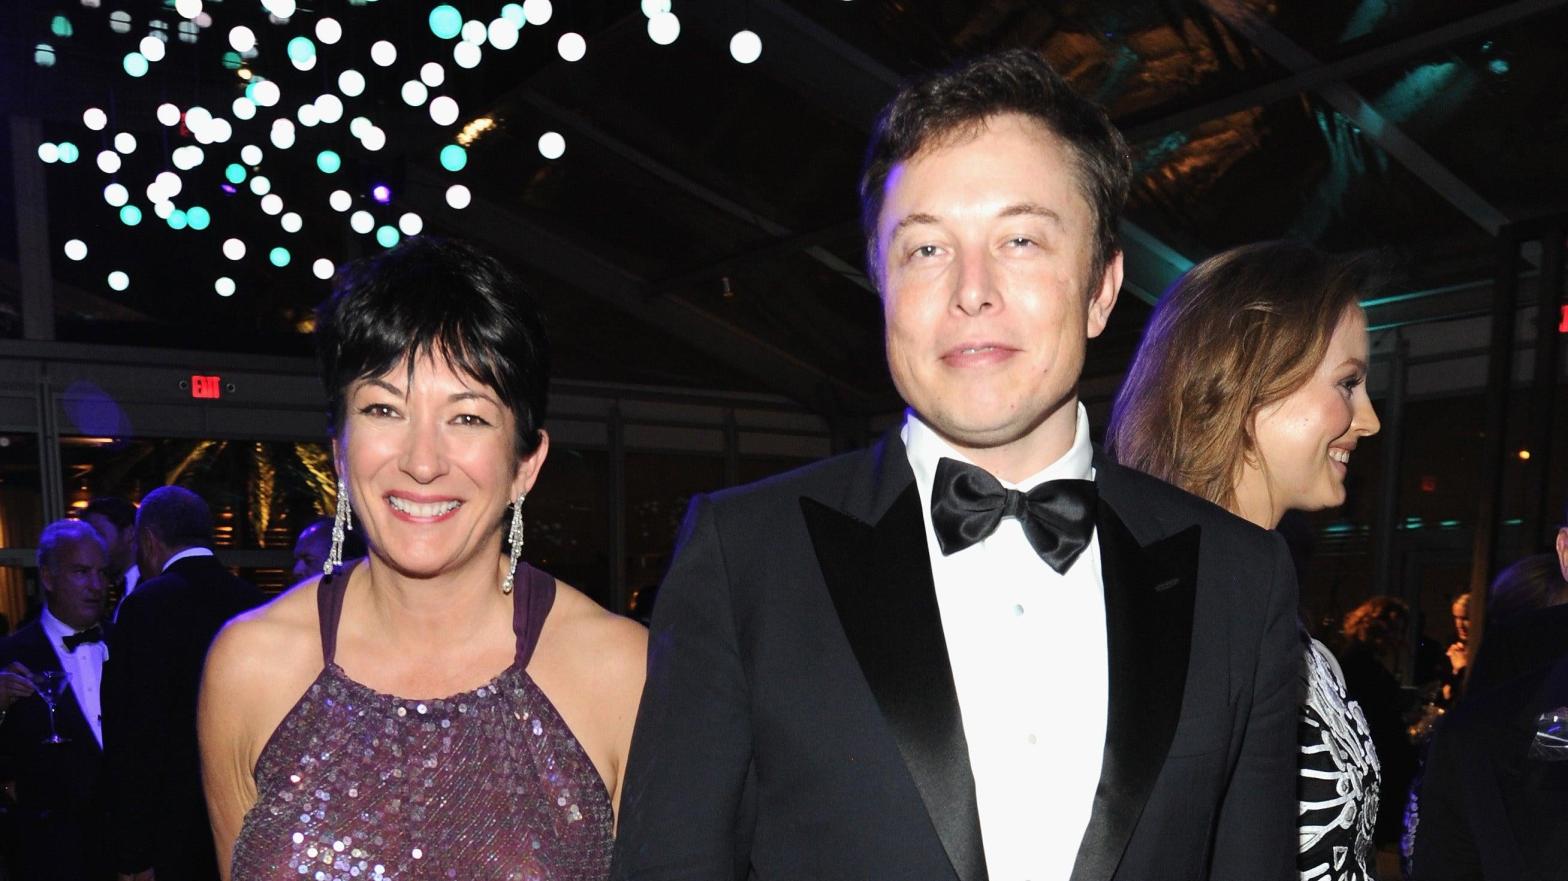 Elon Musk alongside Ghislaine Maxwell at the 2014 Vanity Fair Oscar Party Hosted By Graydon Carter on March 2, 2014 in West Hollywood, California. (Photo: Kevin Mazur/VF14/WireImage, Getty Images)